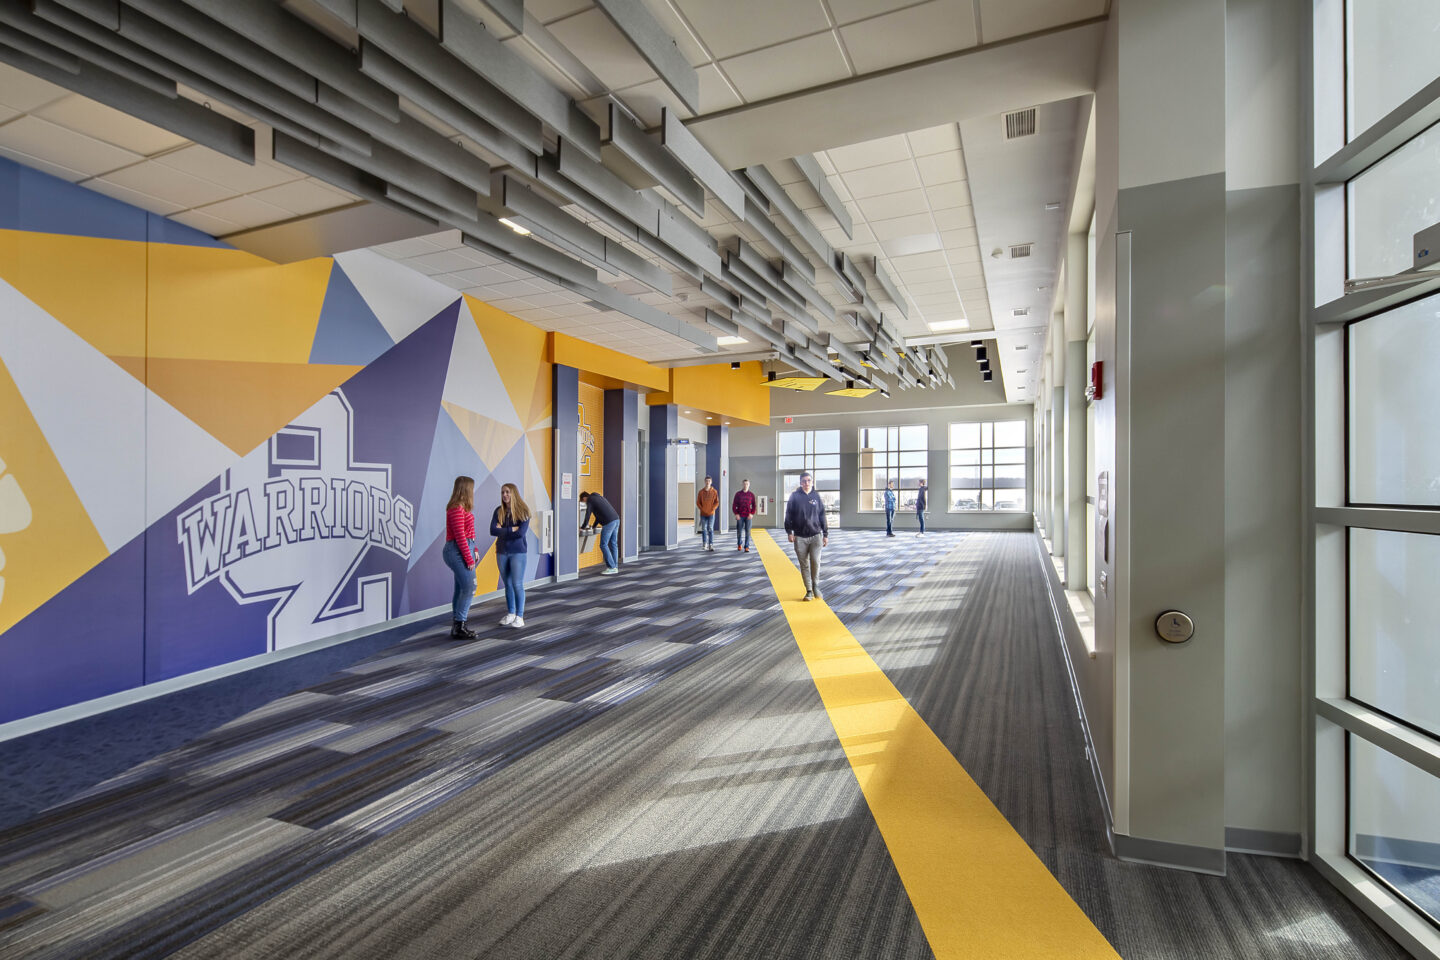 A colorful mural with school colors and logo lines a window-enclosed hallway at Northern Ozaukee School District